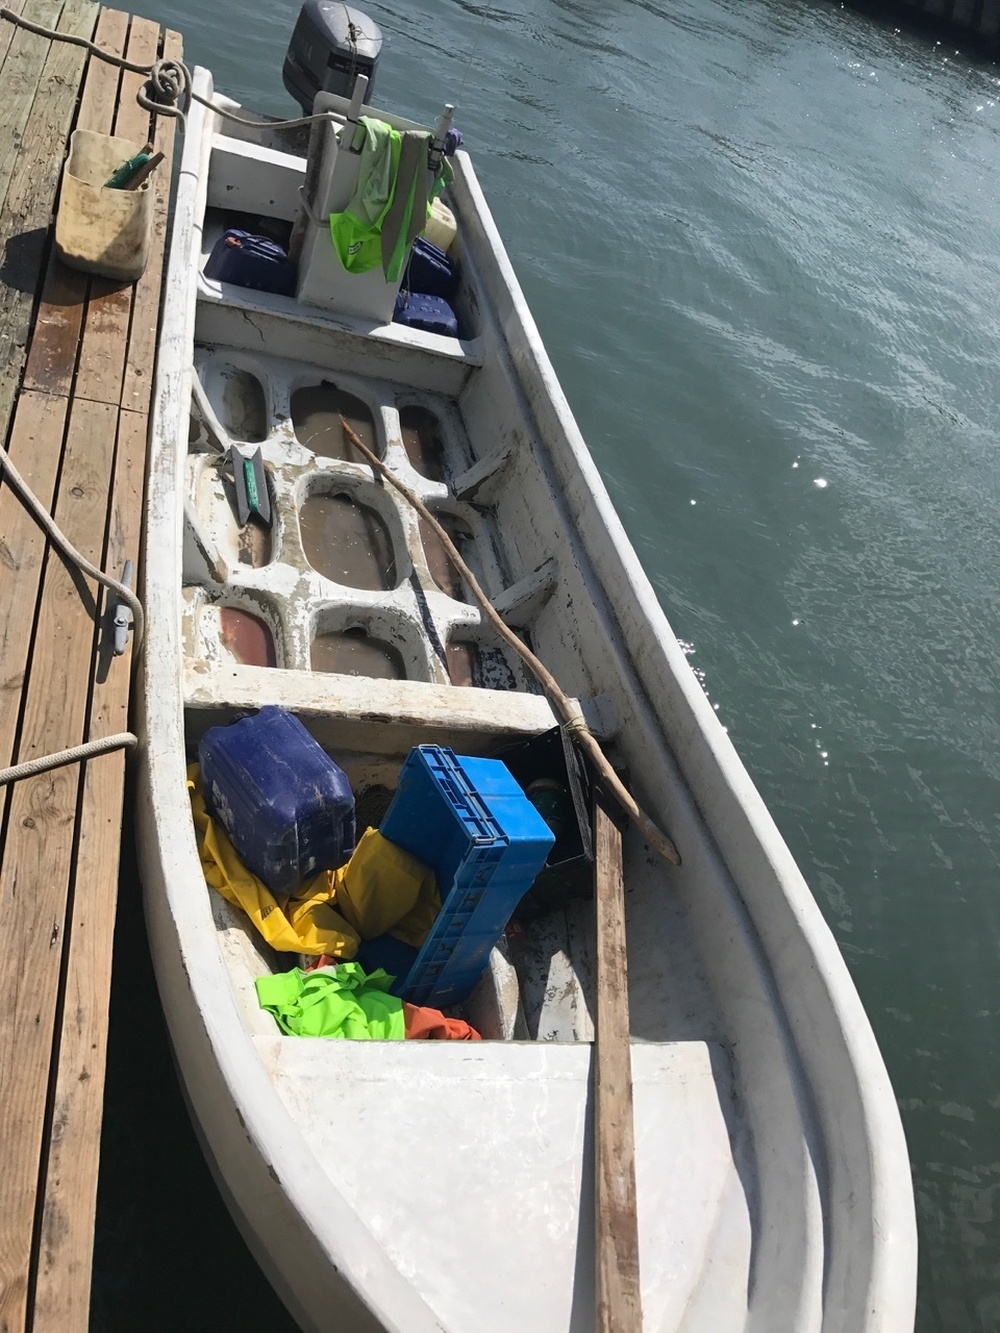 Illegal lancha boat discovered in Corpus Christi